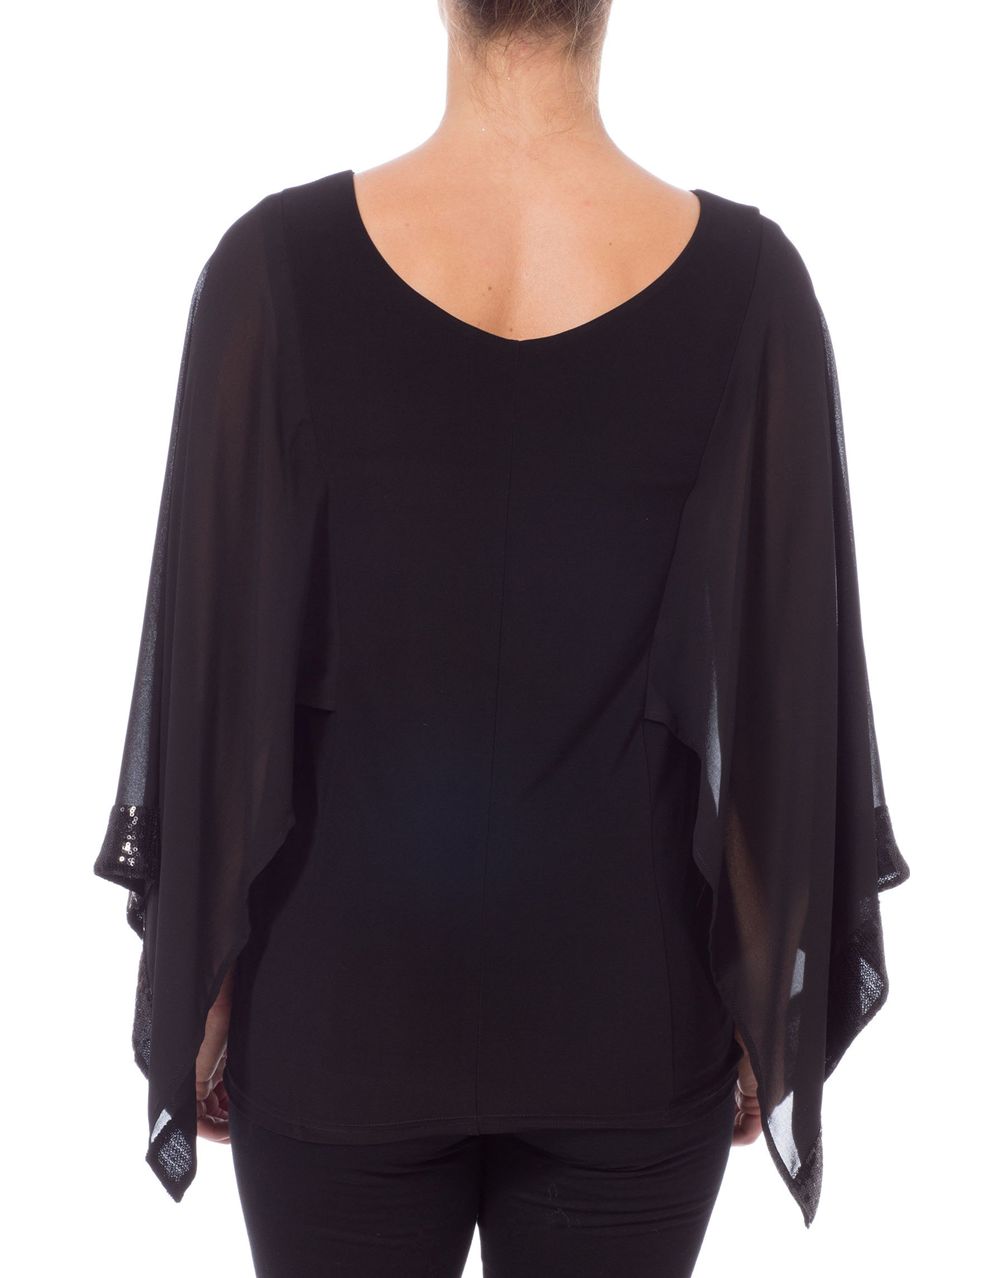 Sequin Trim Chiffon And Jersey Top